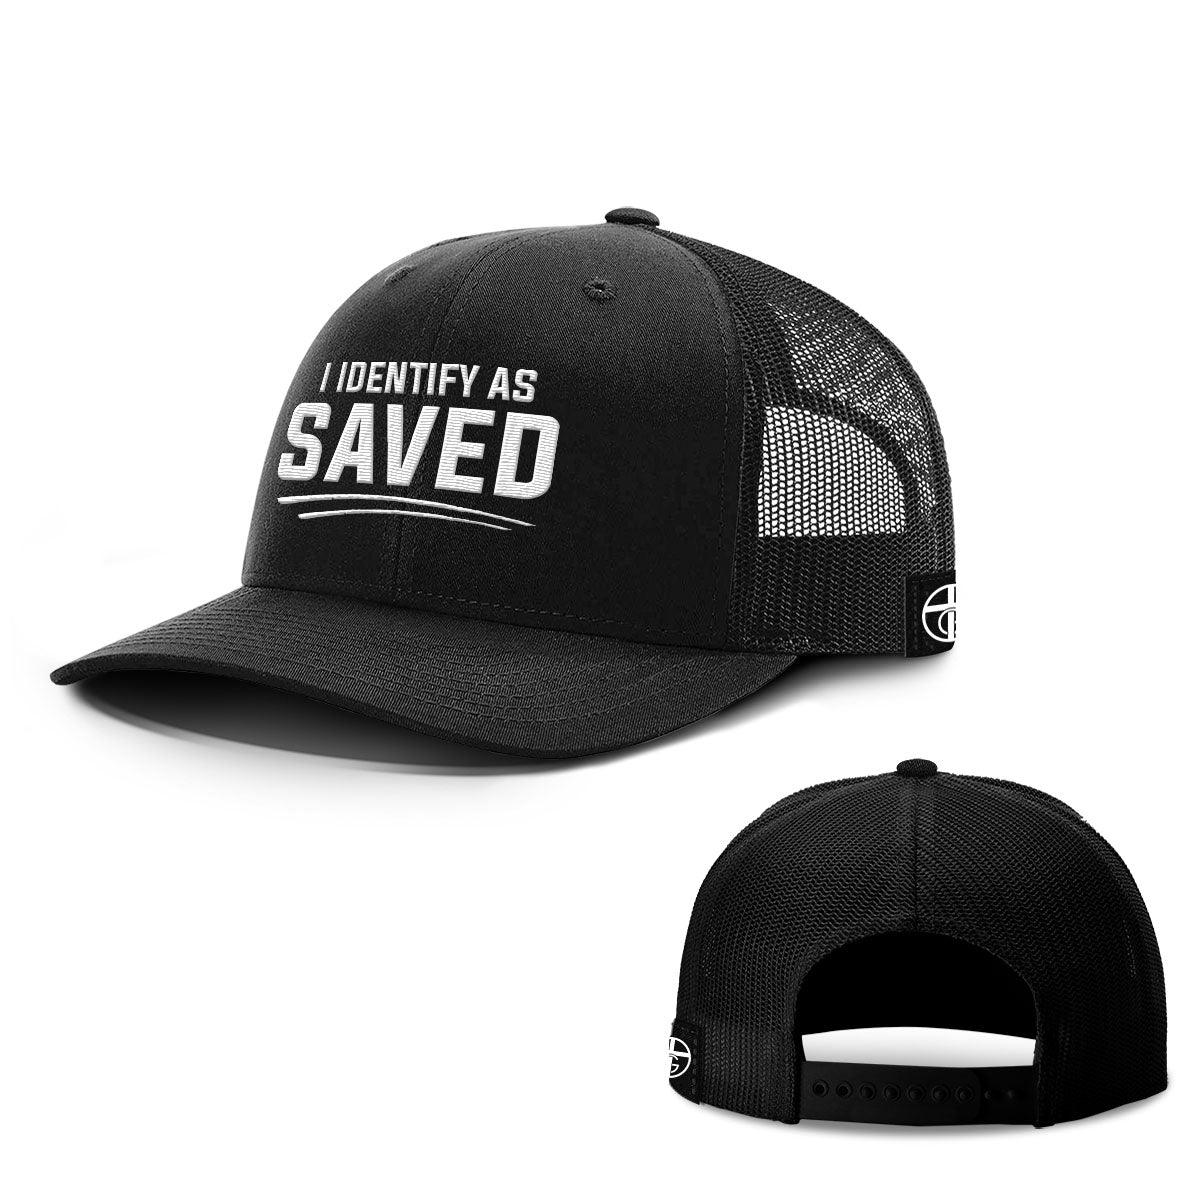 I Identify As Saved Hats